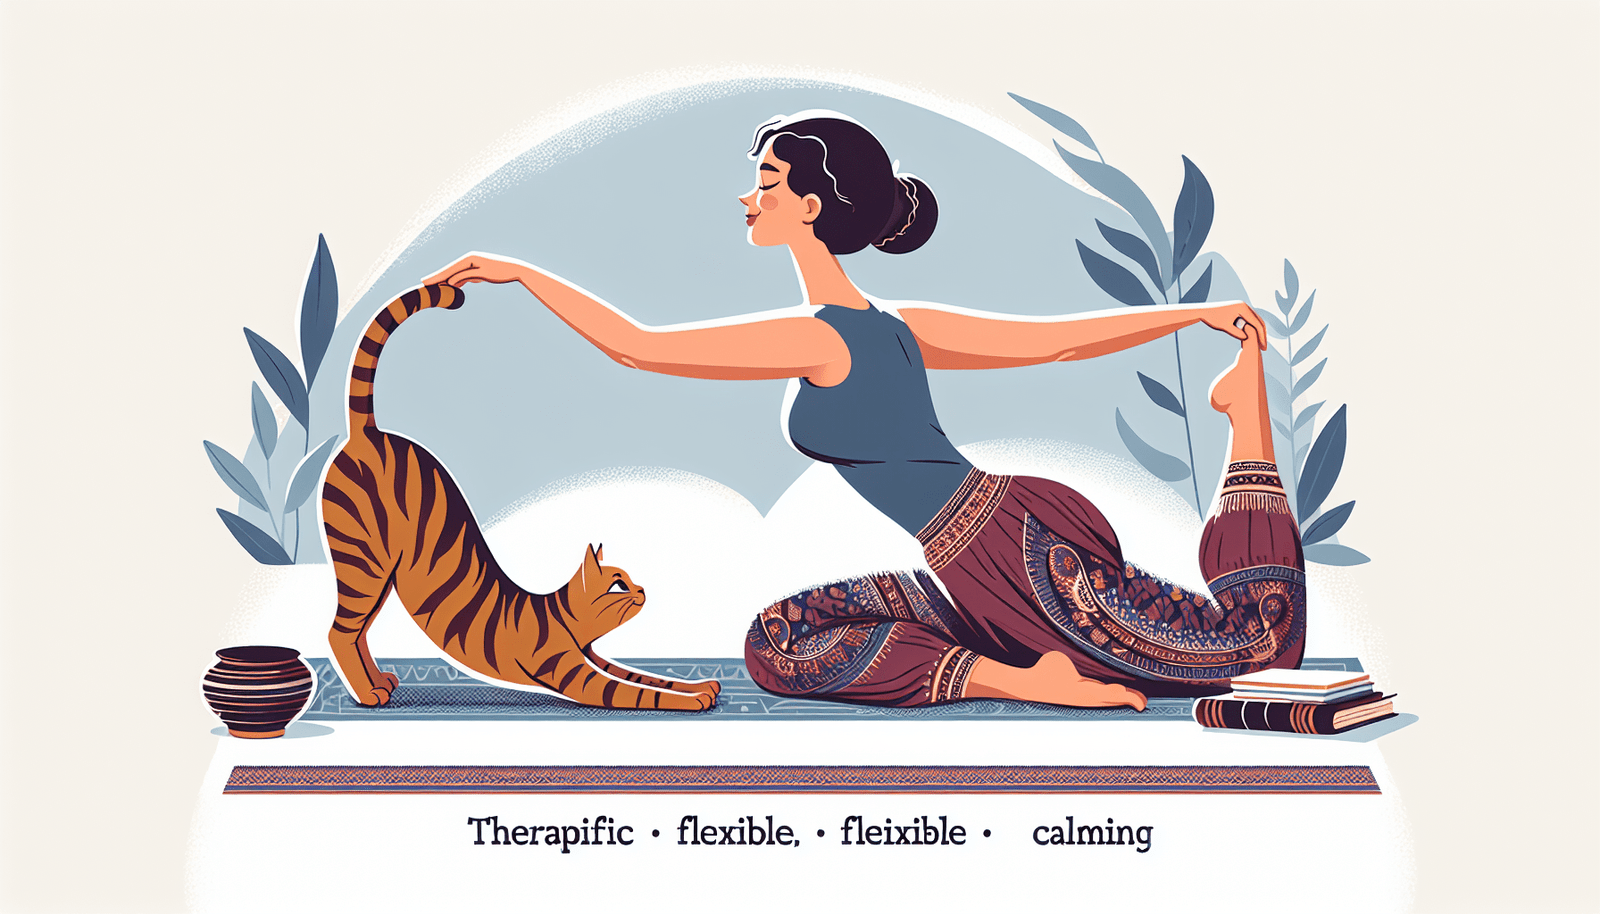 Kitty Yoga: The Benefits Of Practicing Yoga With Your Cat